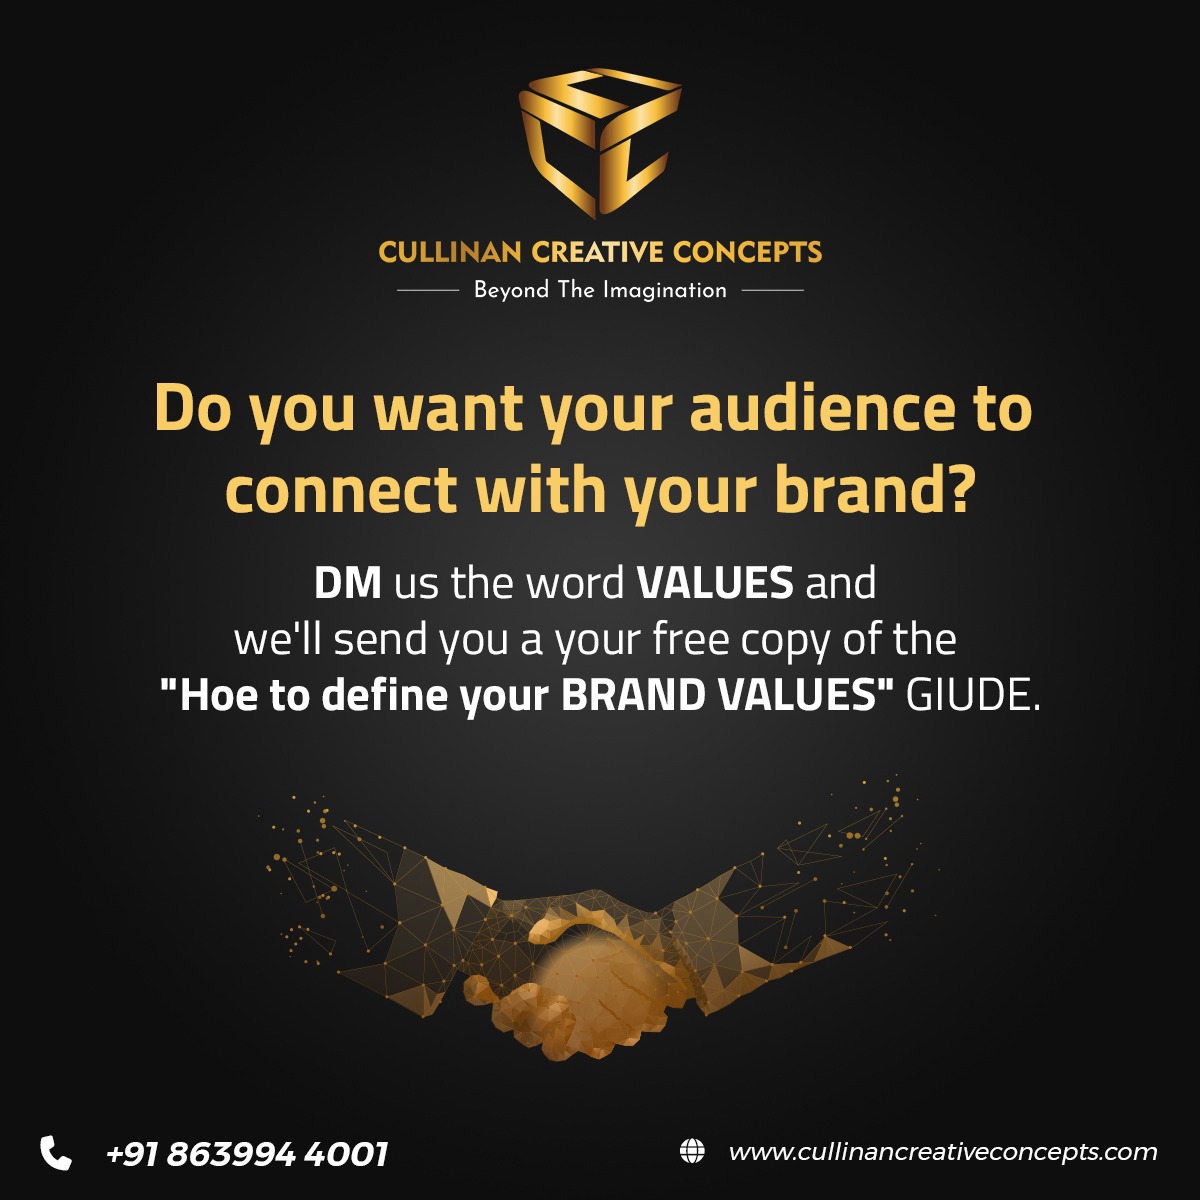 Visit Us@  cullinancreativeconcepts.com   #ConnectWithYourBrand
#BrandValuesGuide
#DefineYourValues
#AudienceConnection
#FreeGuideOffer
#BrandValuesMatter
#buildyourbrand
#BrandIdentity
#AuthenticityMatters
#KnowYourValues
#BrandSuccess
#AudienceEngagement